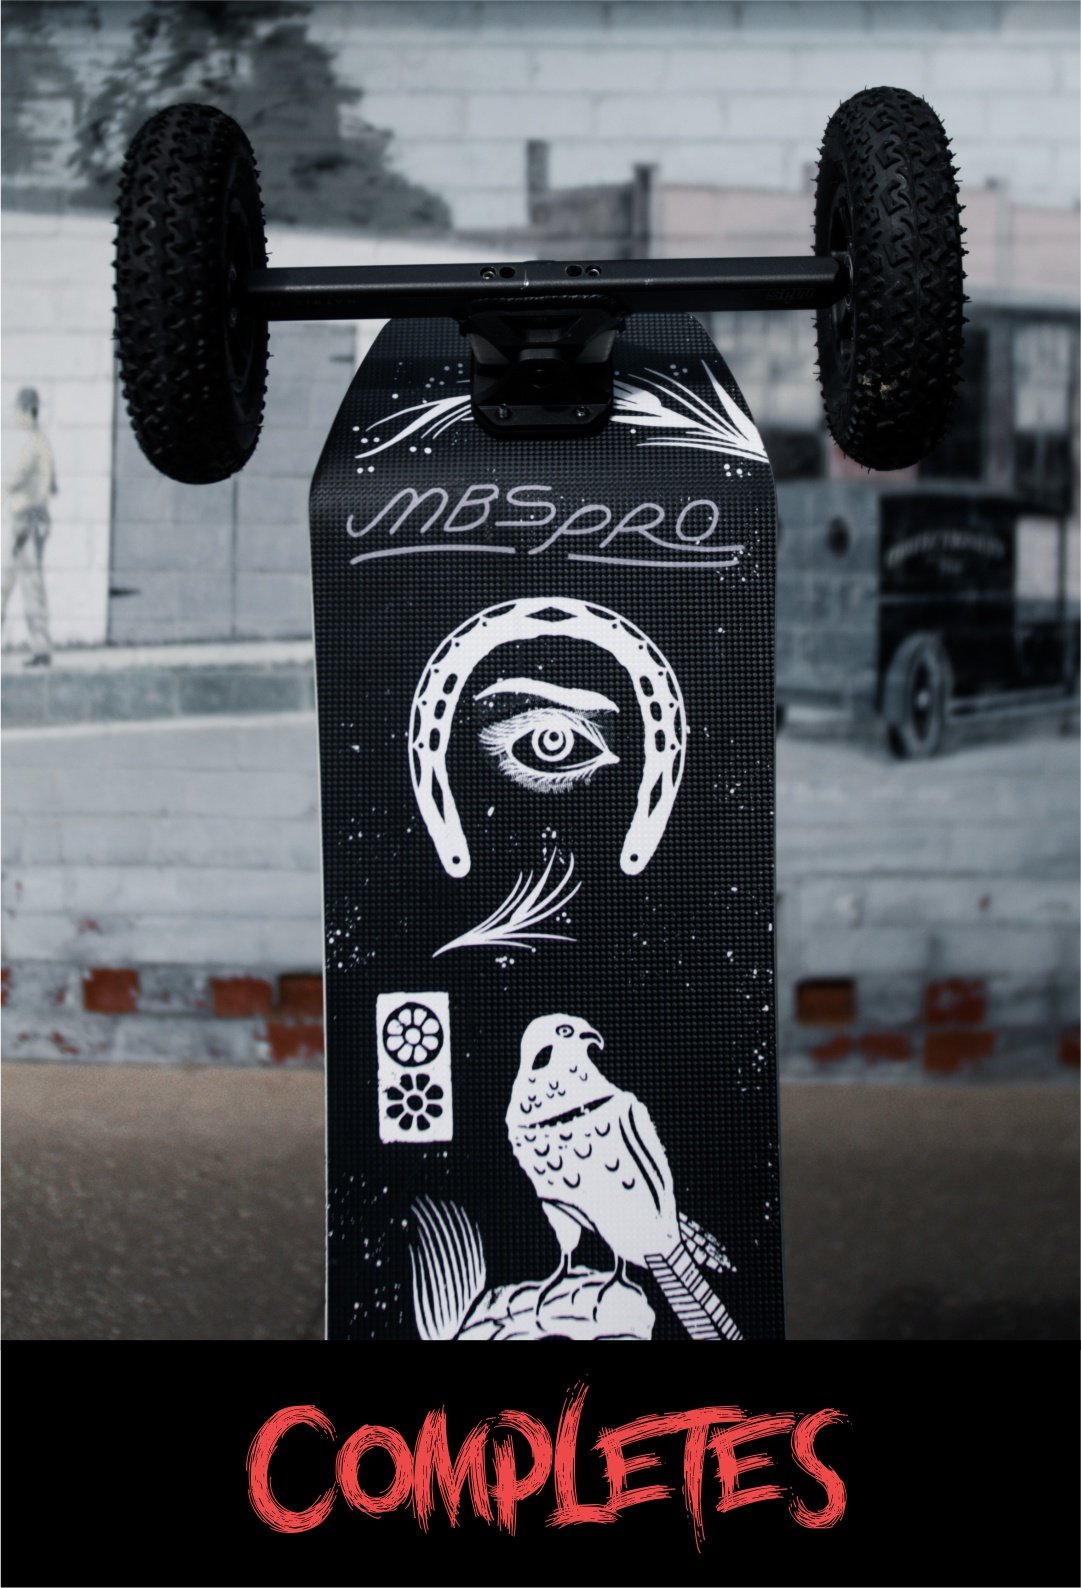 MBS Mountainboards - Featuring the latest board technology for mountainboarding, land kiteboarding, and electric riding